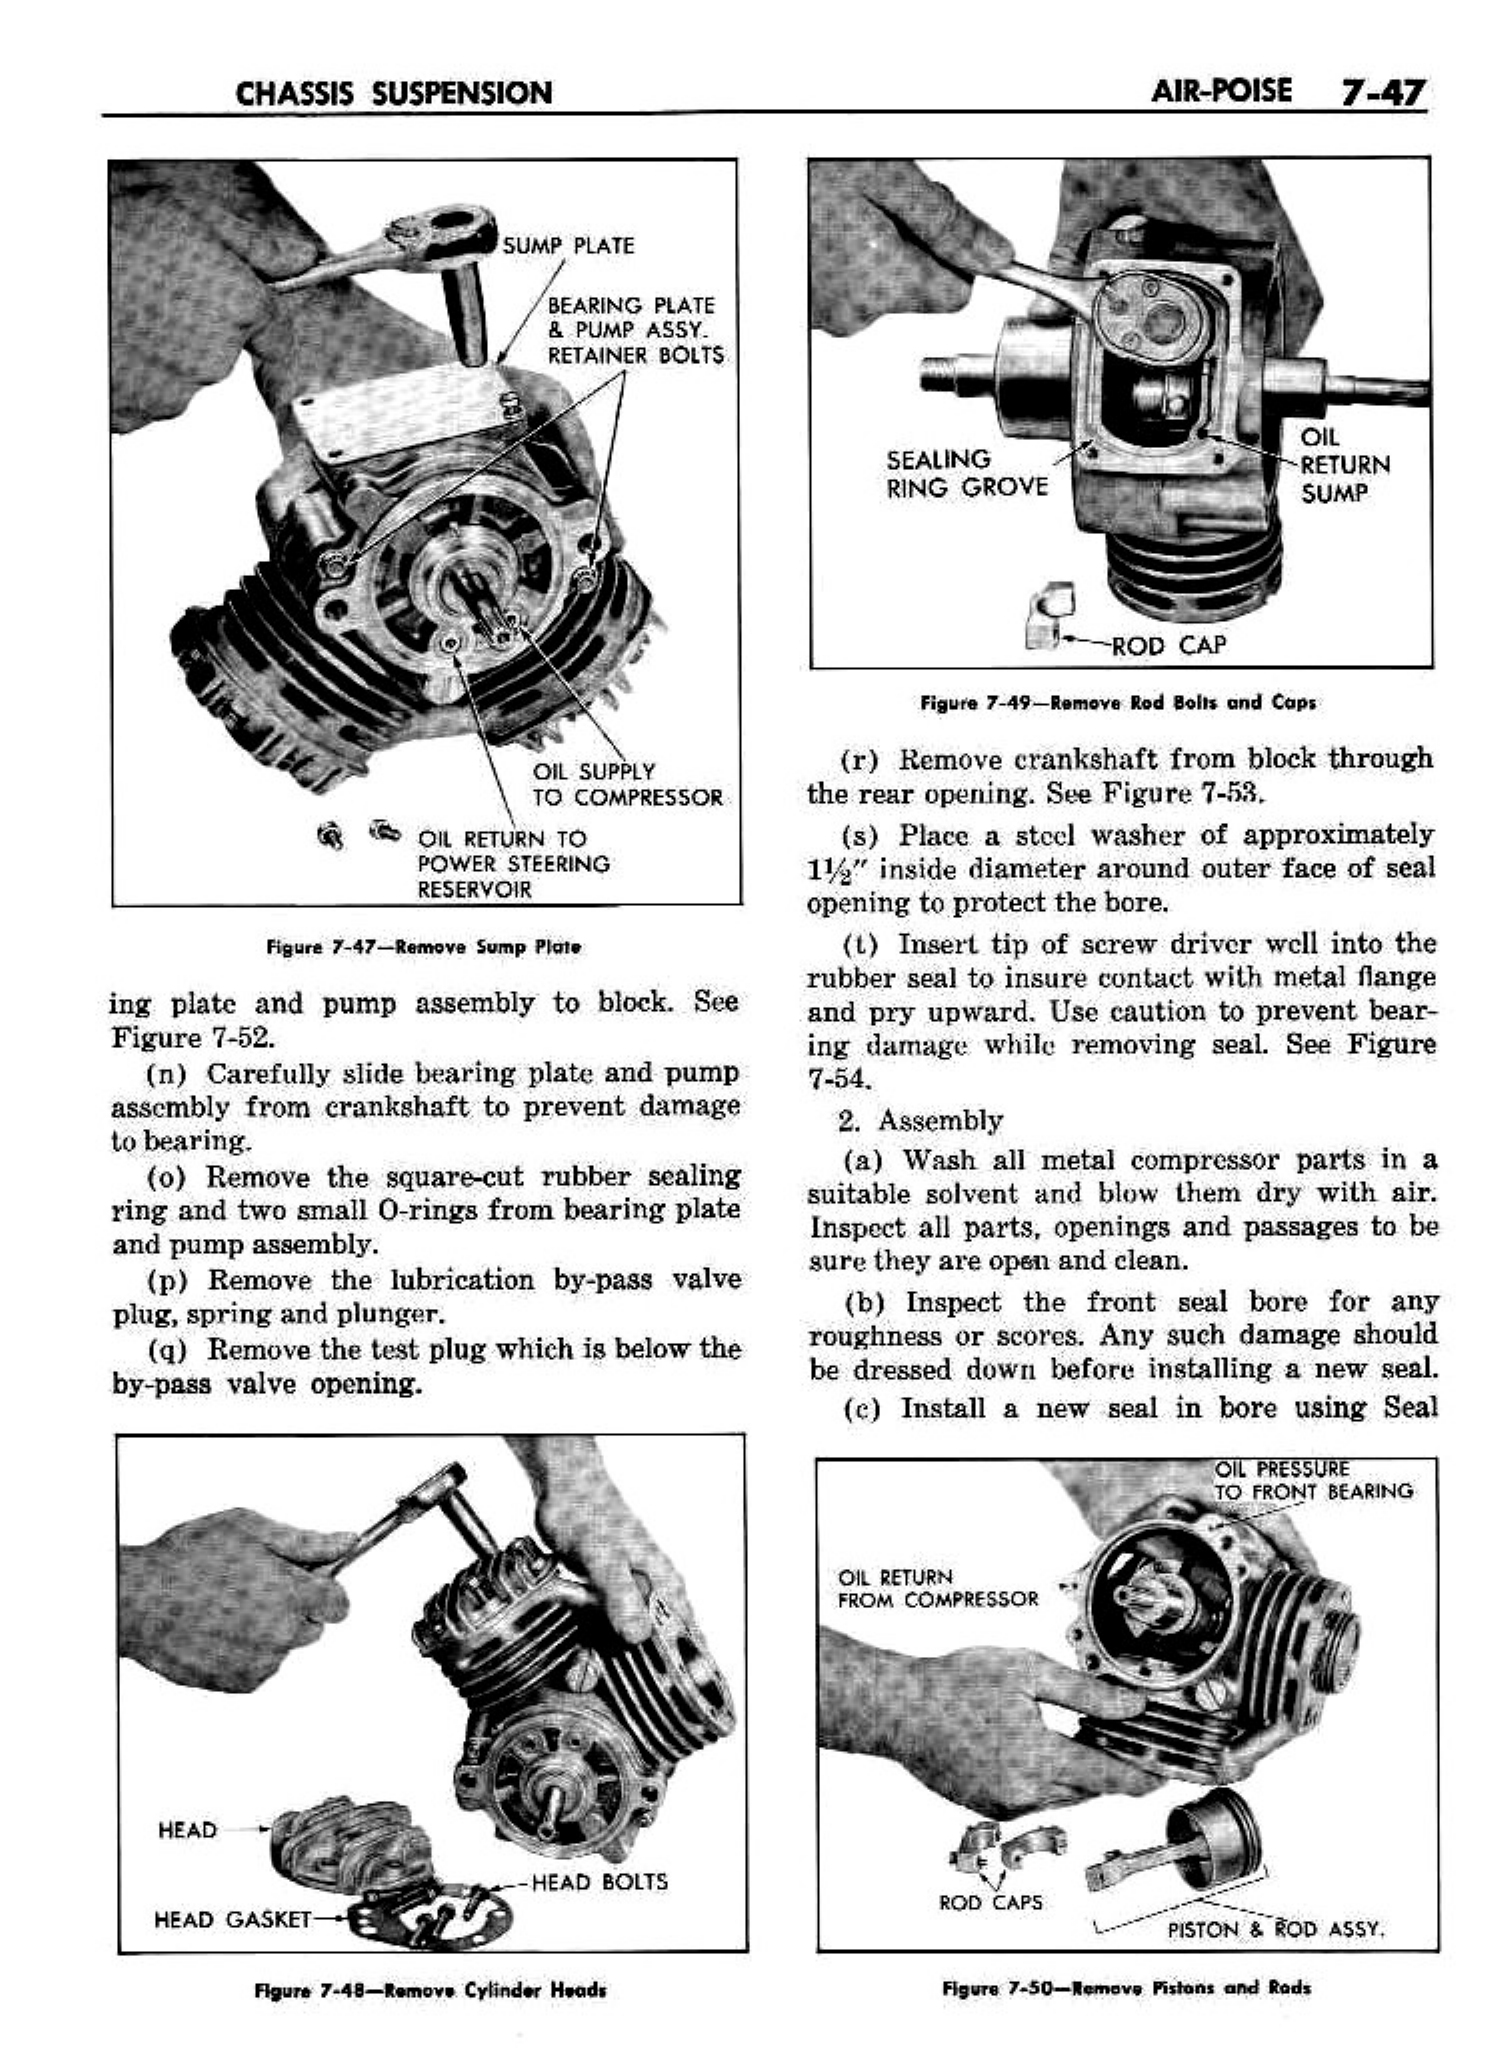 n_08 1958 Buick Shop Manual - Chassis Suspension_47.jpg